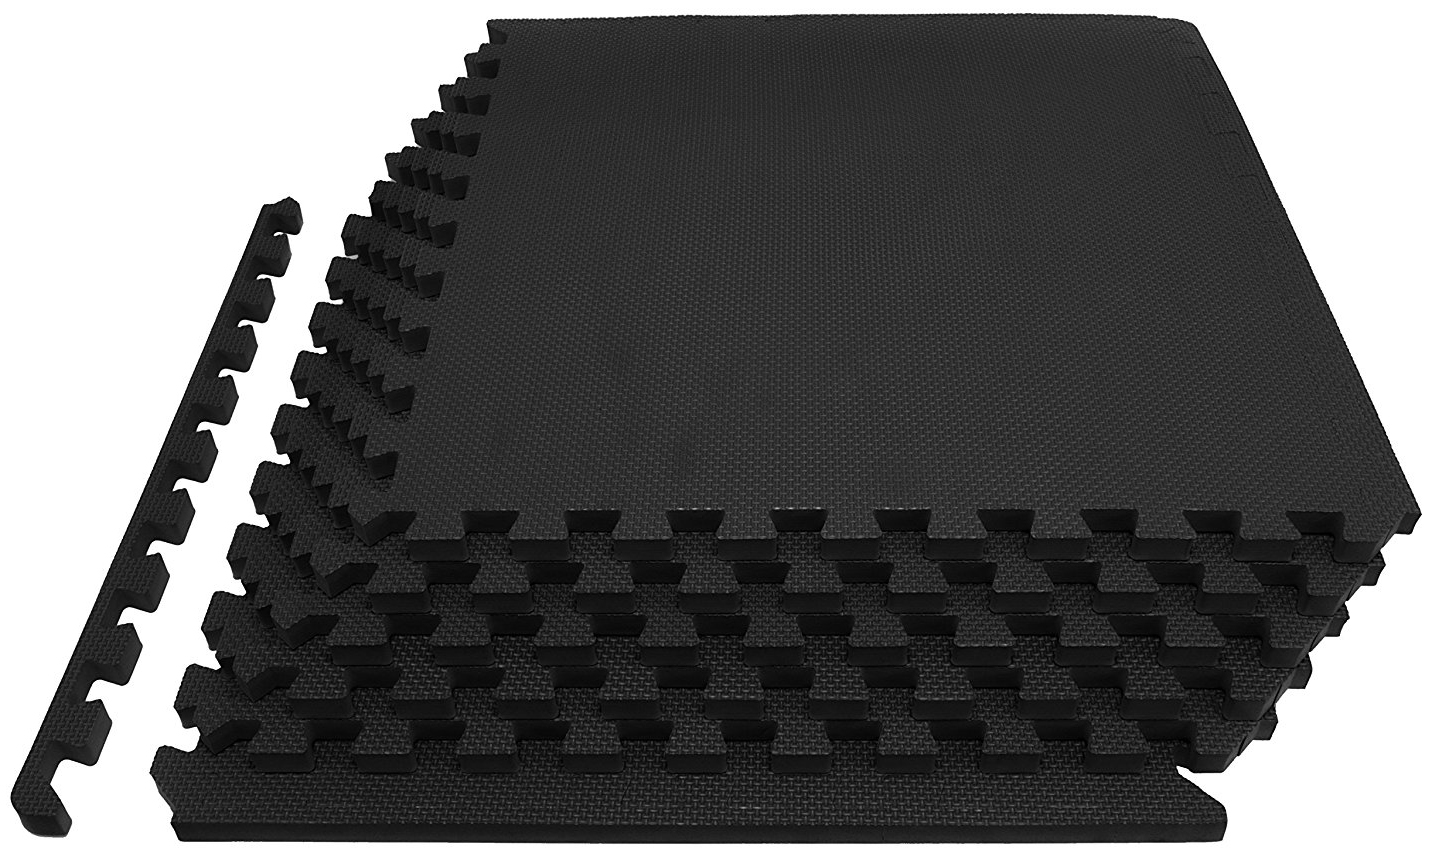 Aoerte Puzzle Exercise Mat EVA Foam Interlocking Tiles Protective Flooring for Gym Equipment and Cushion for Workouts 